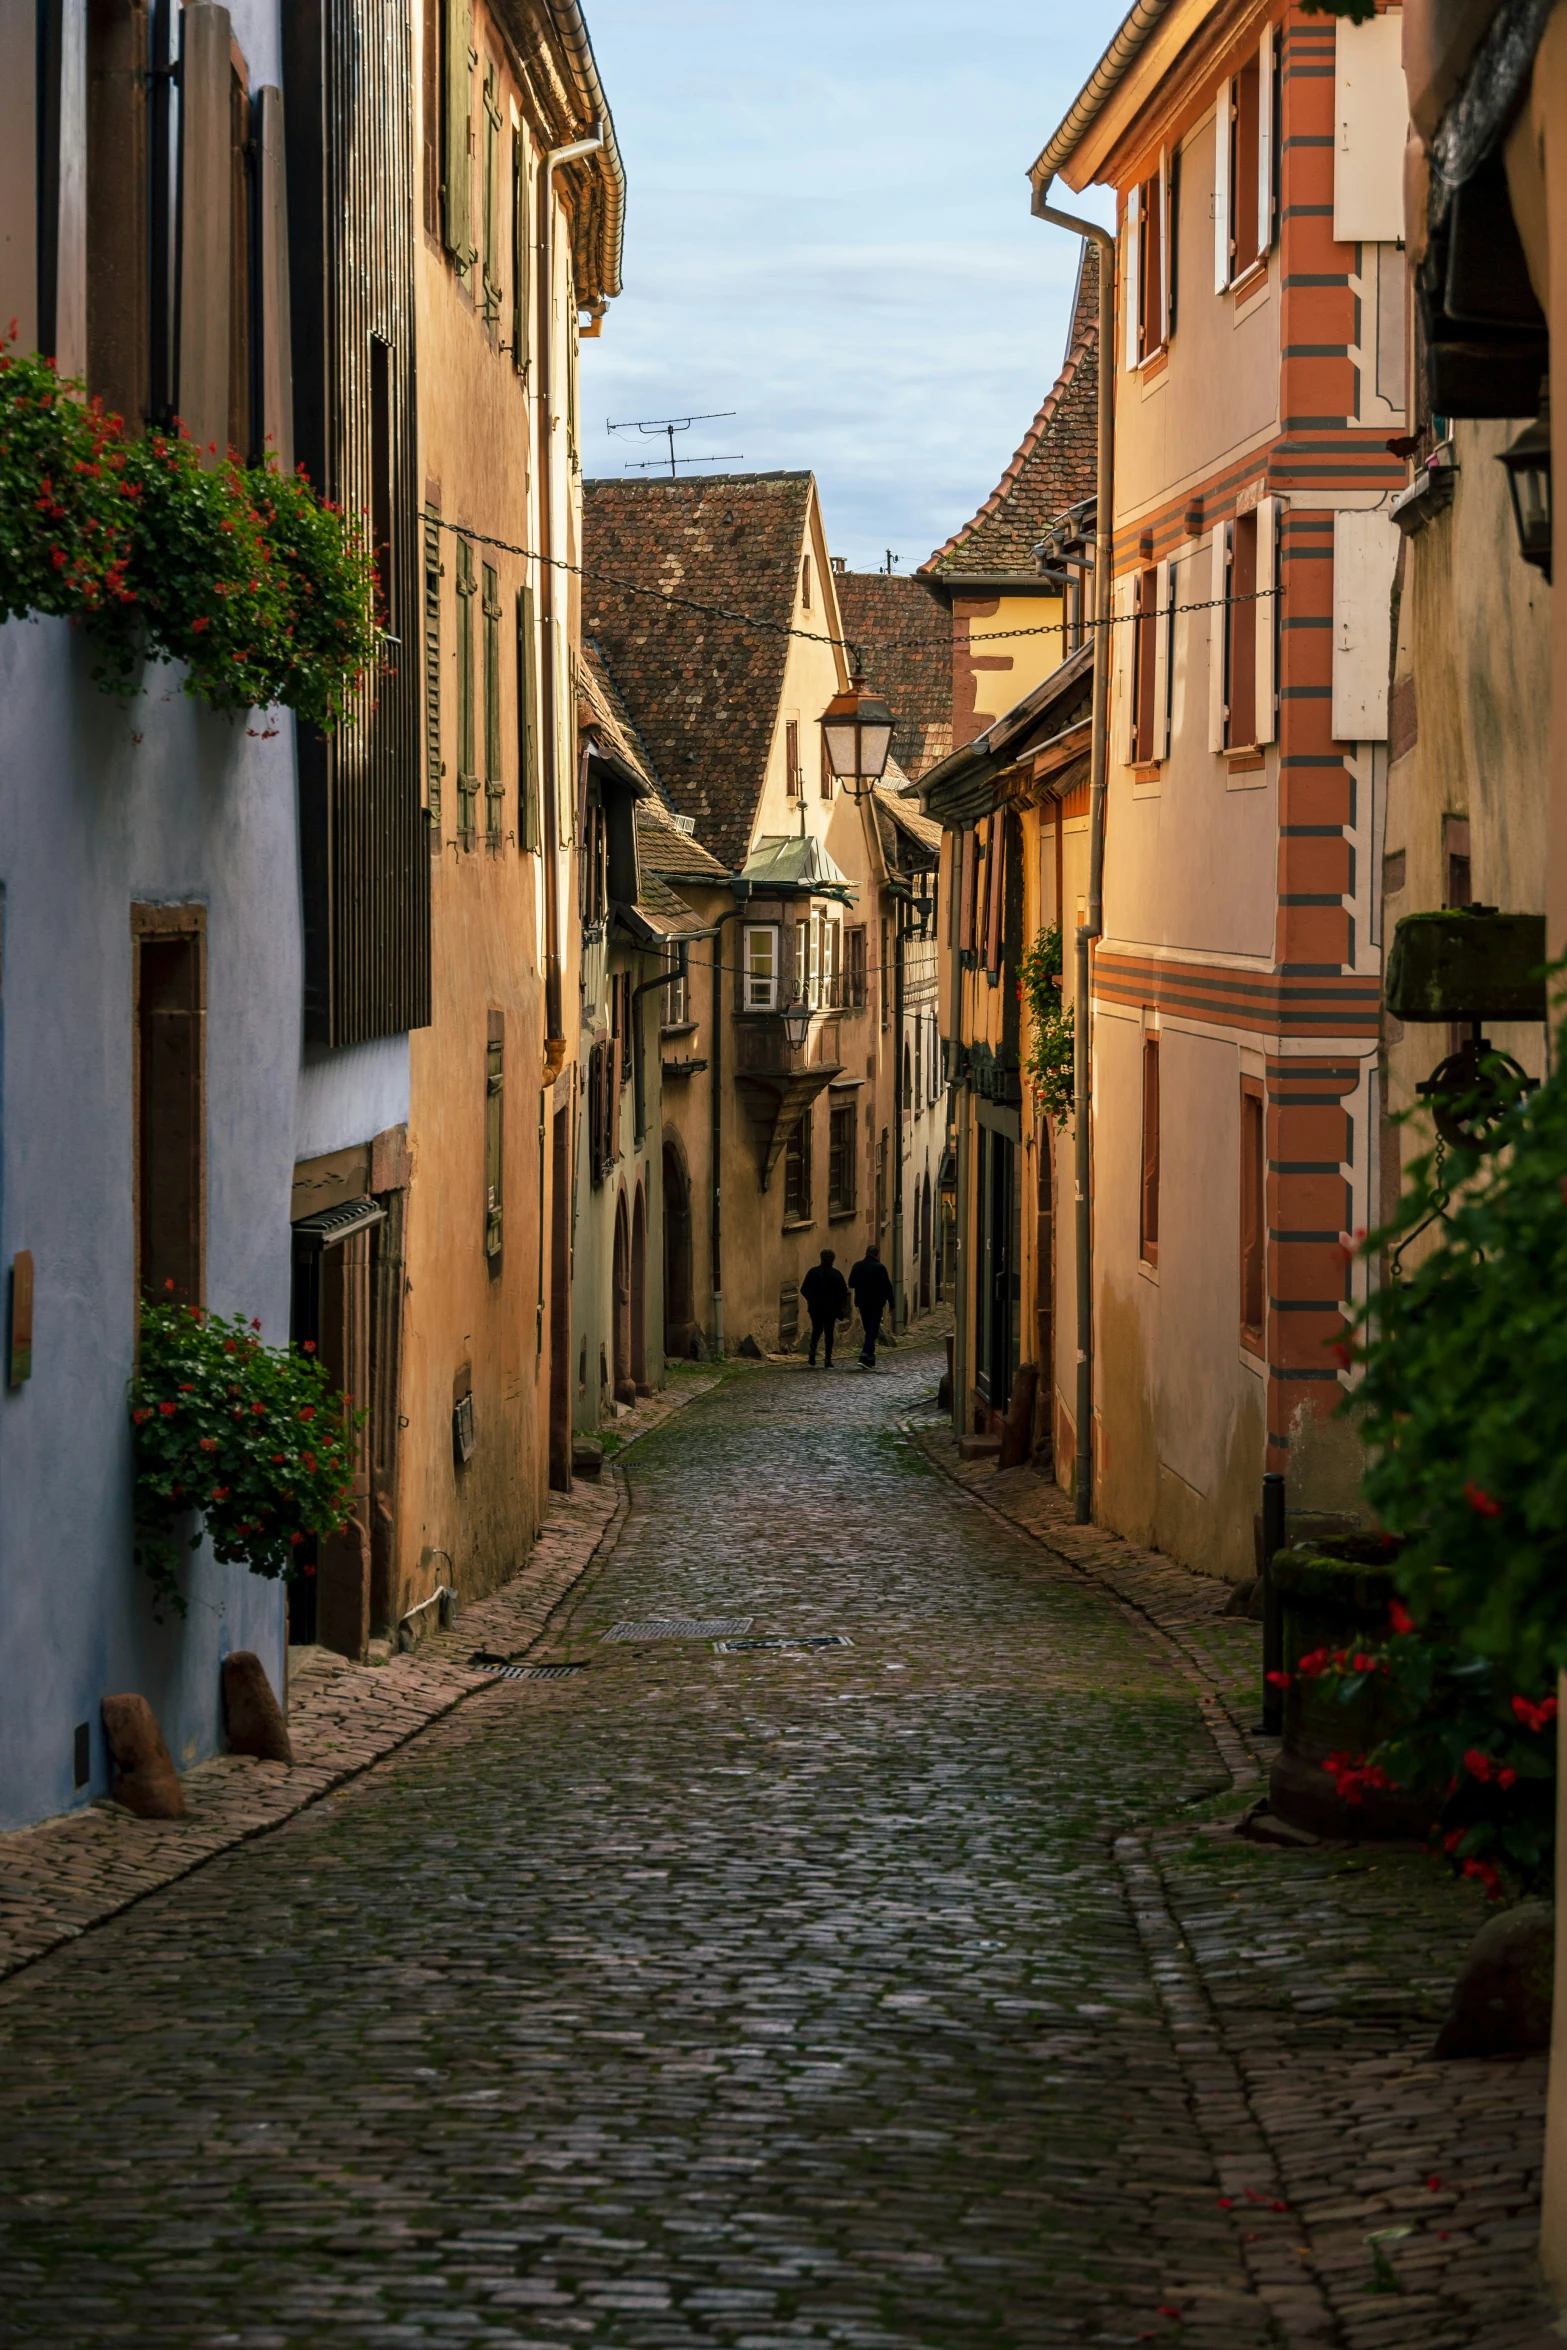 a cobblestone street with a brick sidewalk and buildings